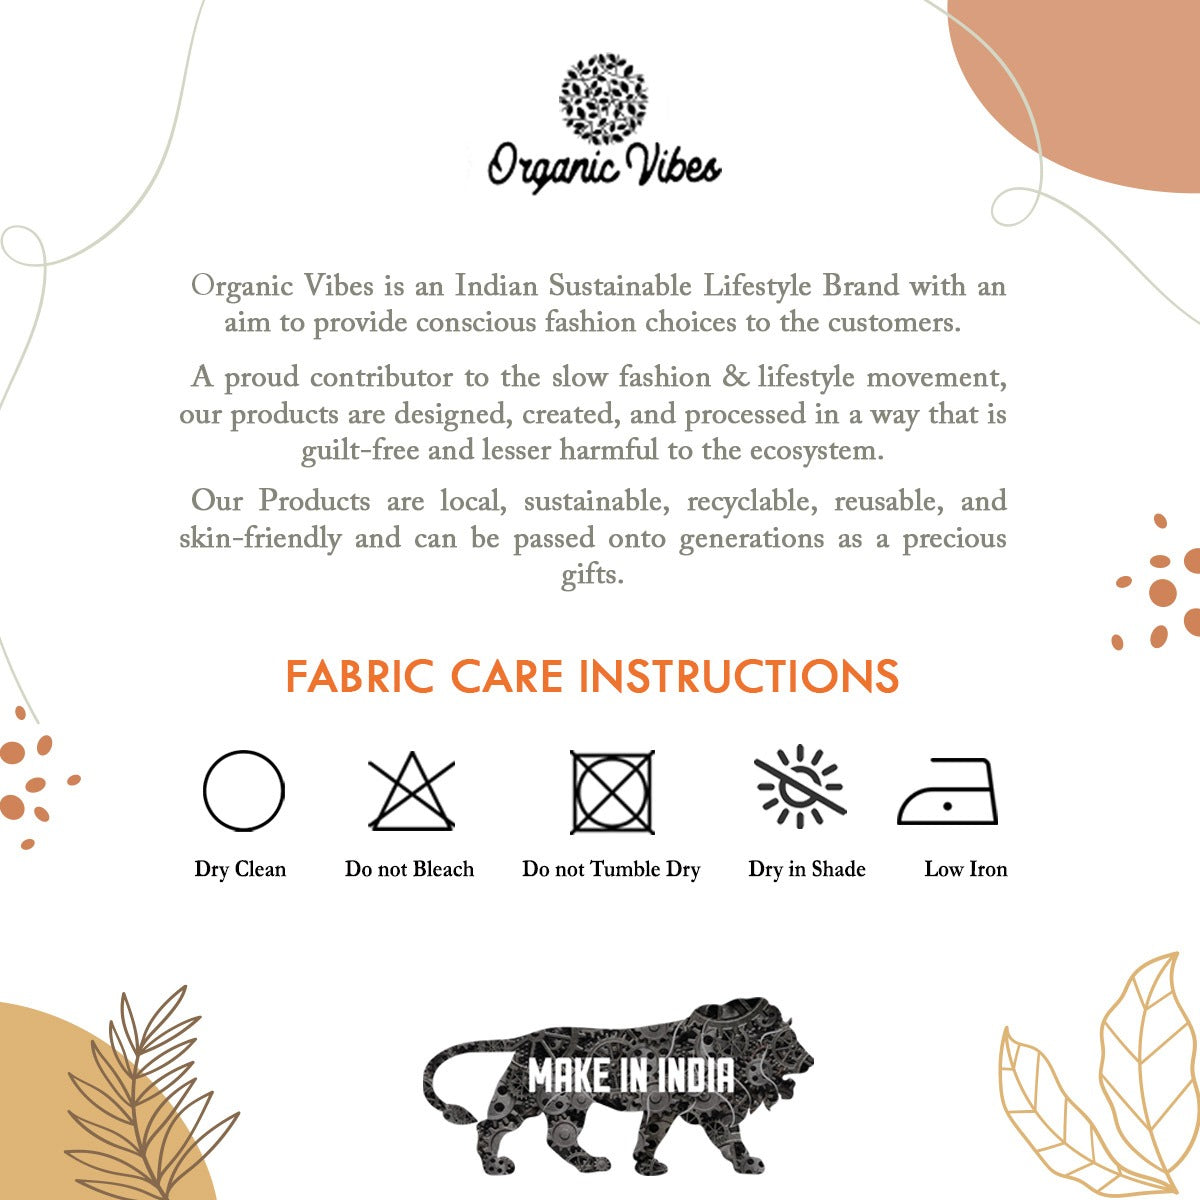 Organic Vibes Care Guide